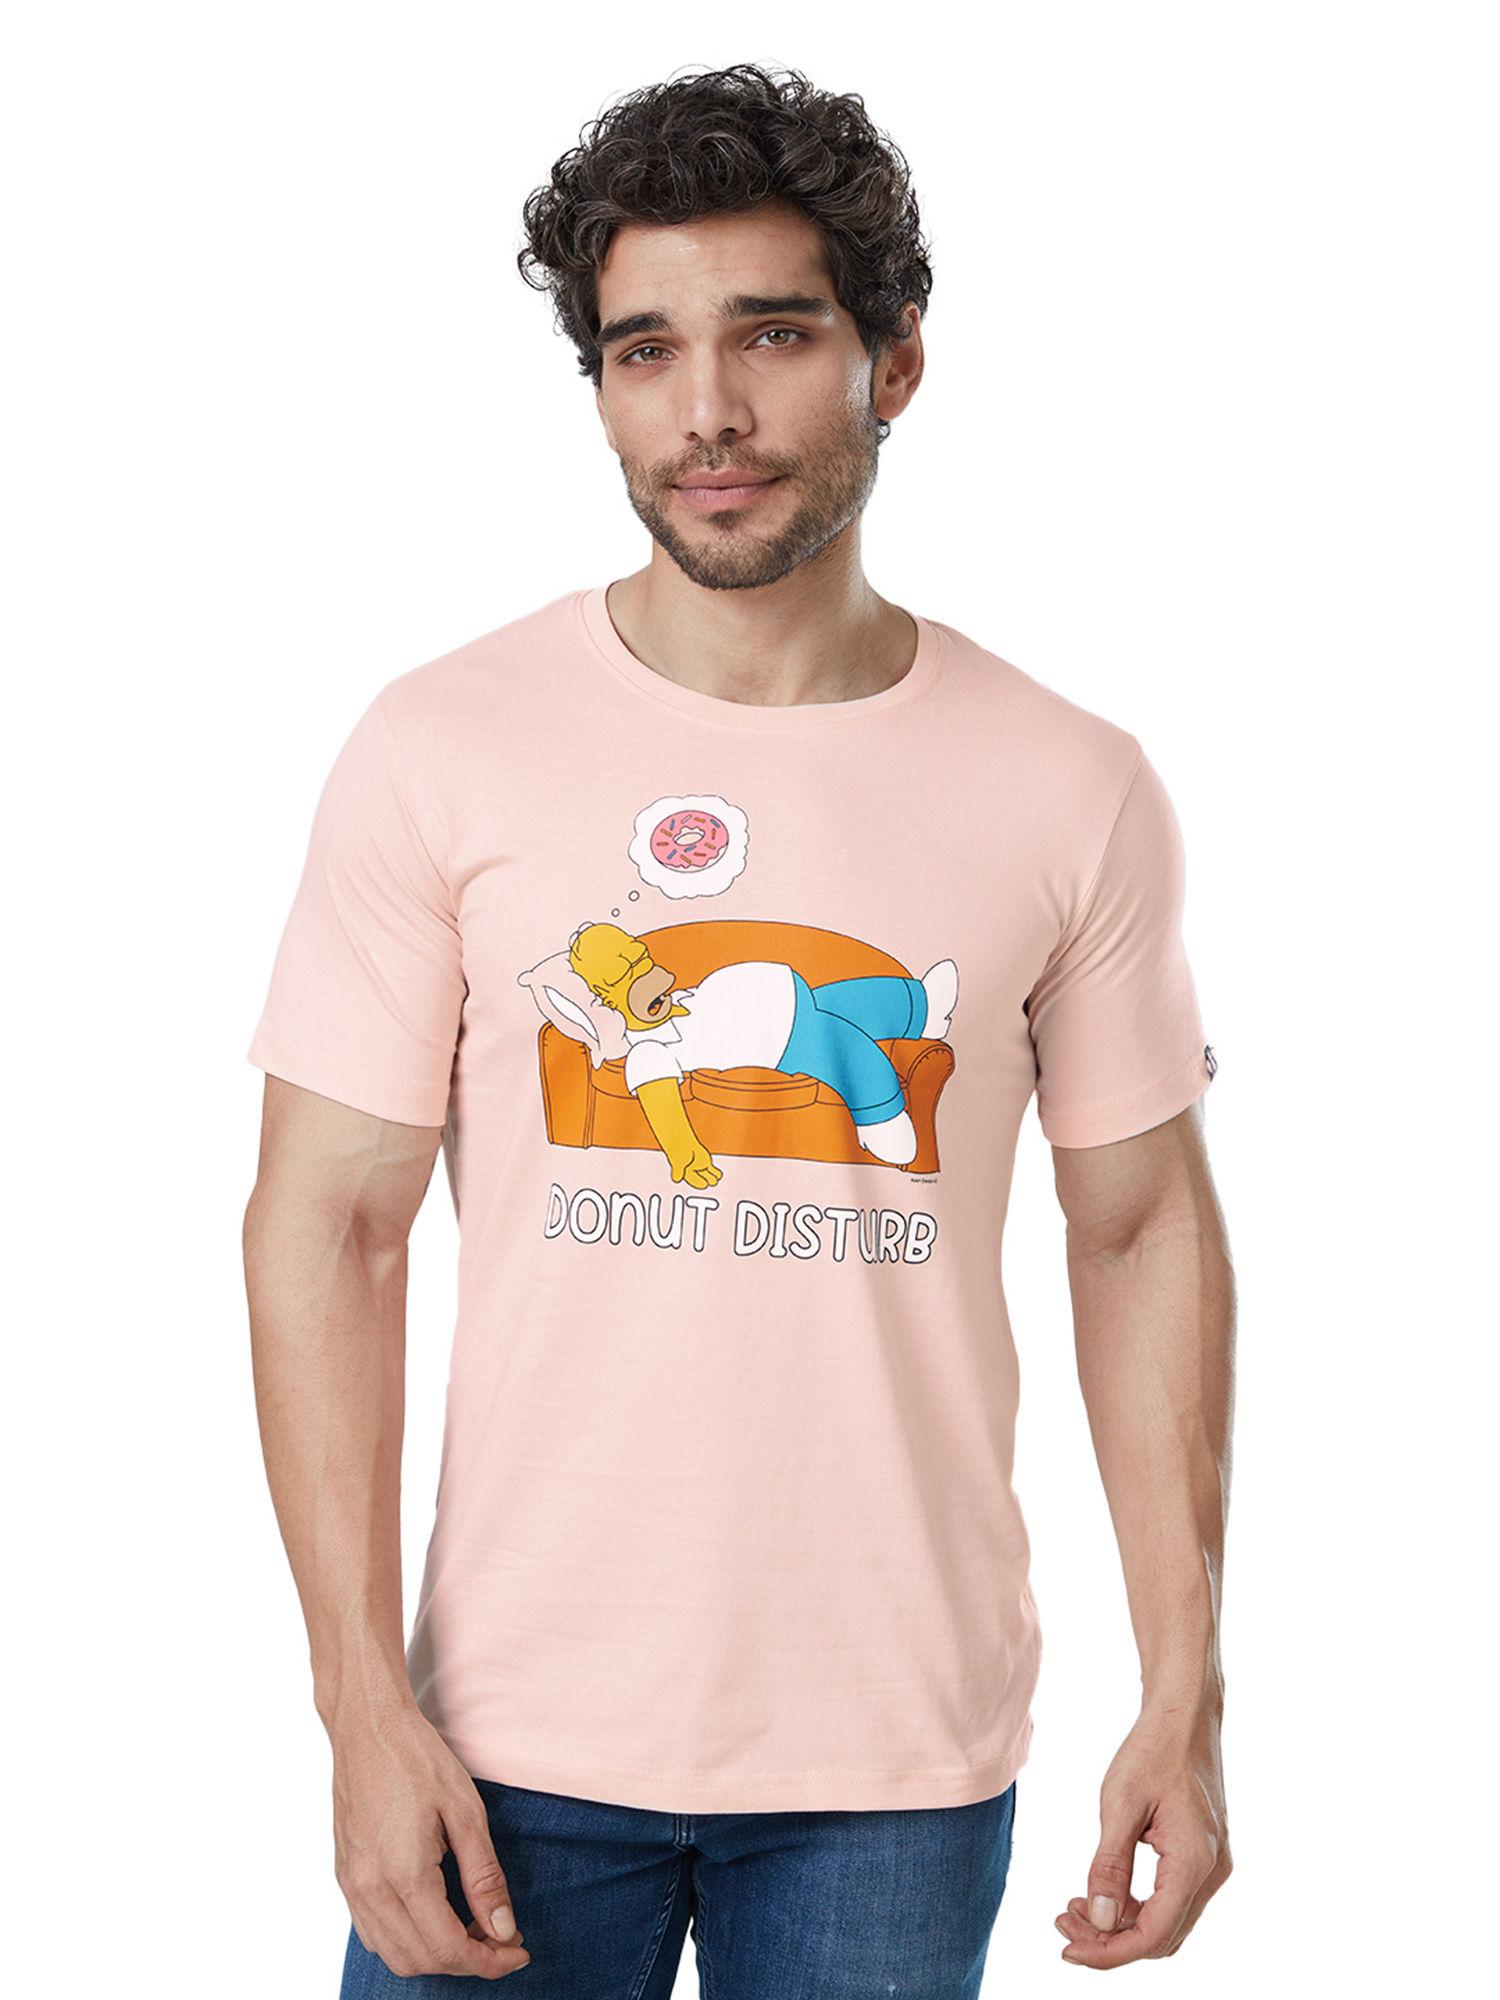 official the simpsons donut disturb t-shirt for mens